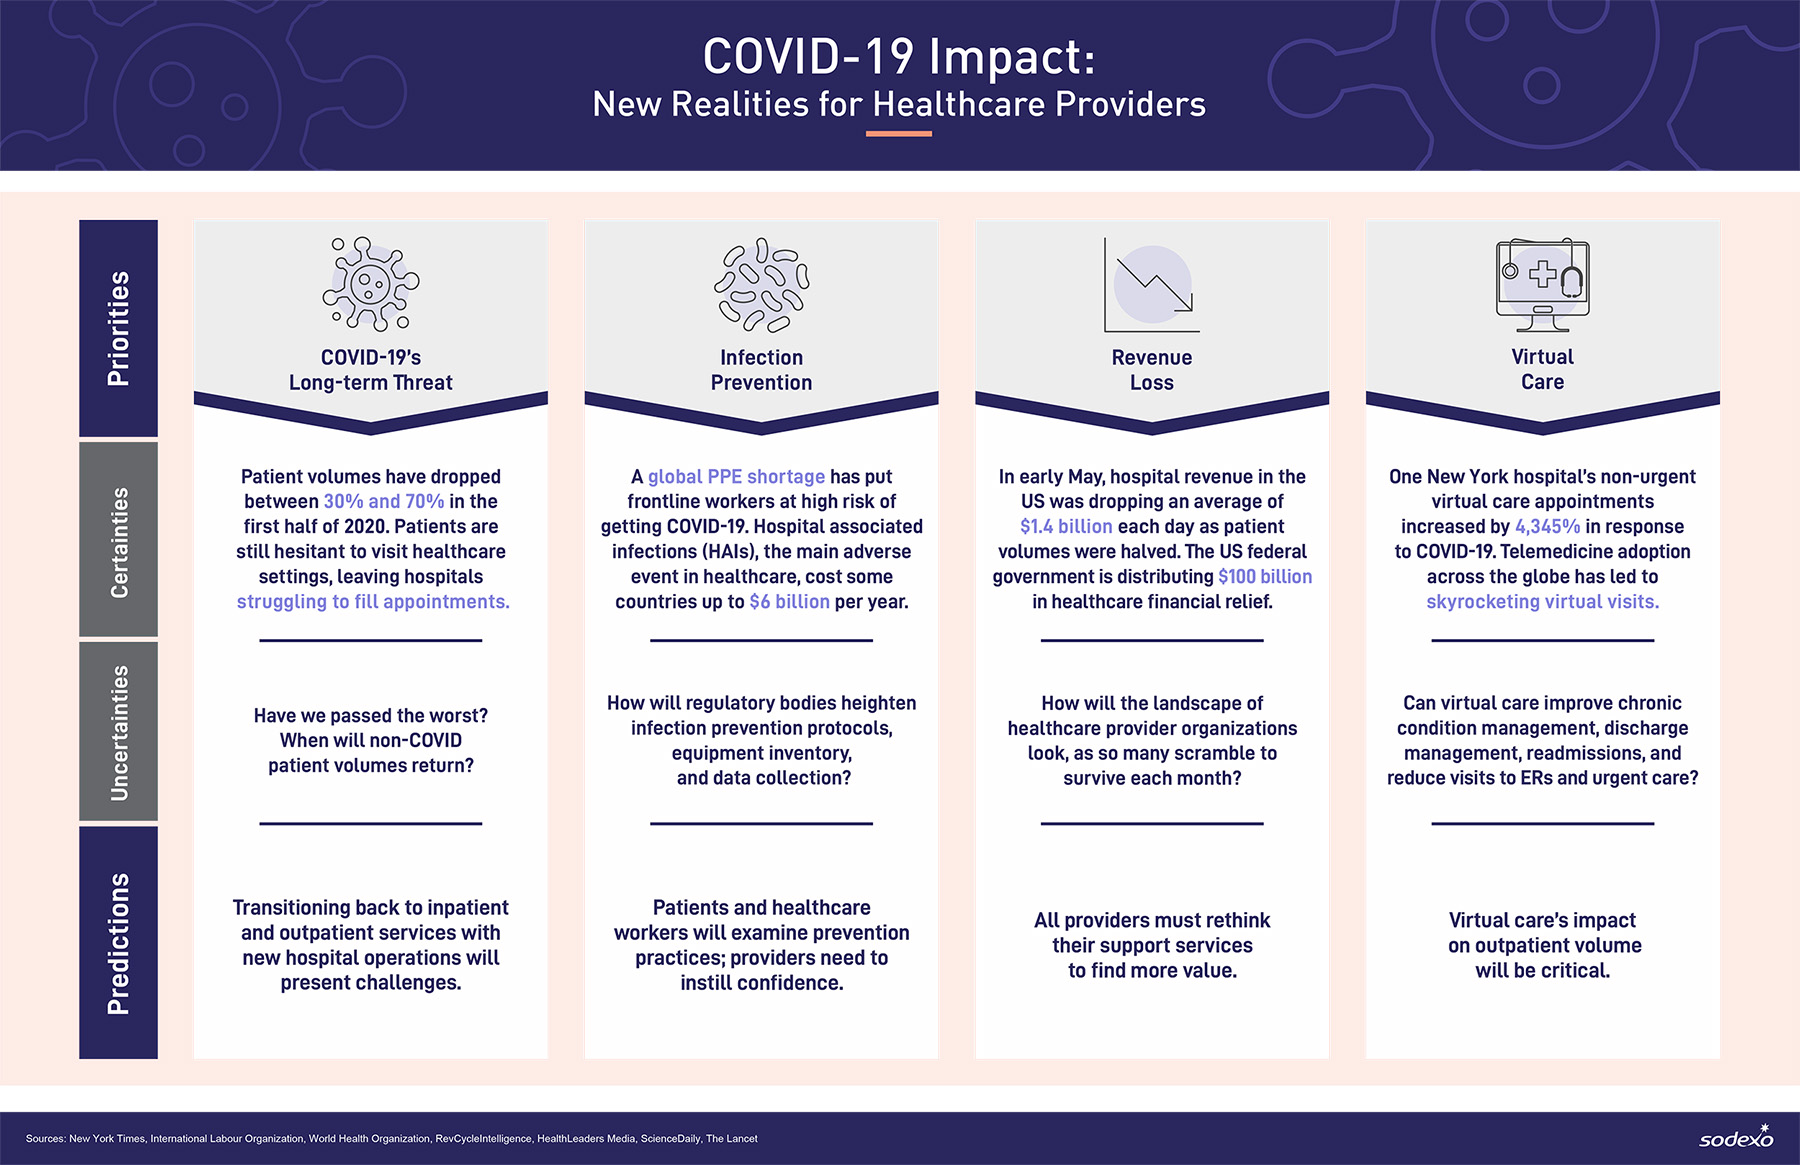 COVID-19 Impact: New Realities for Healthcare Provides (see accessible version below)